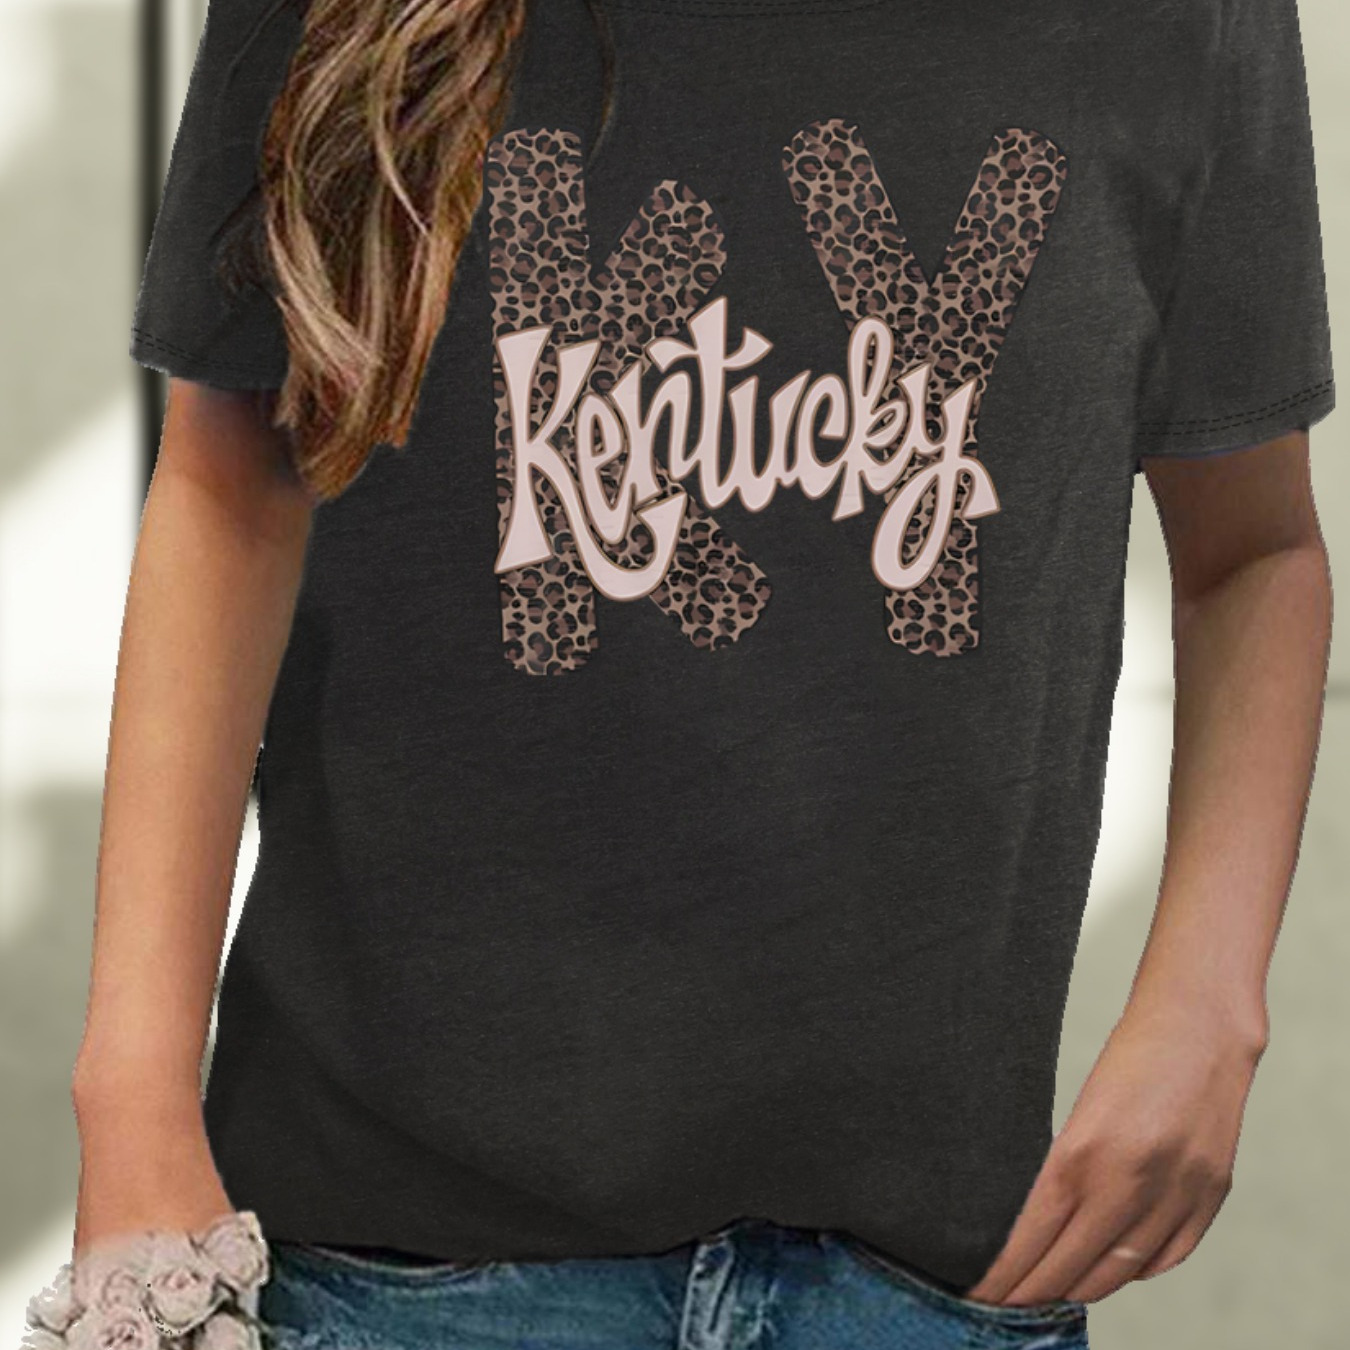 

Kentucky Letter Print T-shirt, Short Sleeve Crew Neck Casual Top For Summer & Spring, Women's Clothing